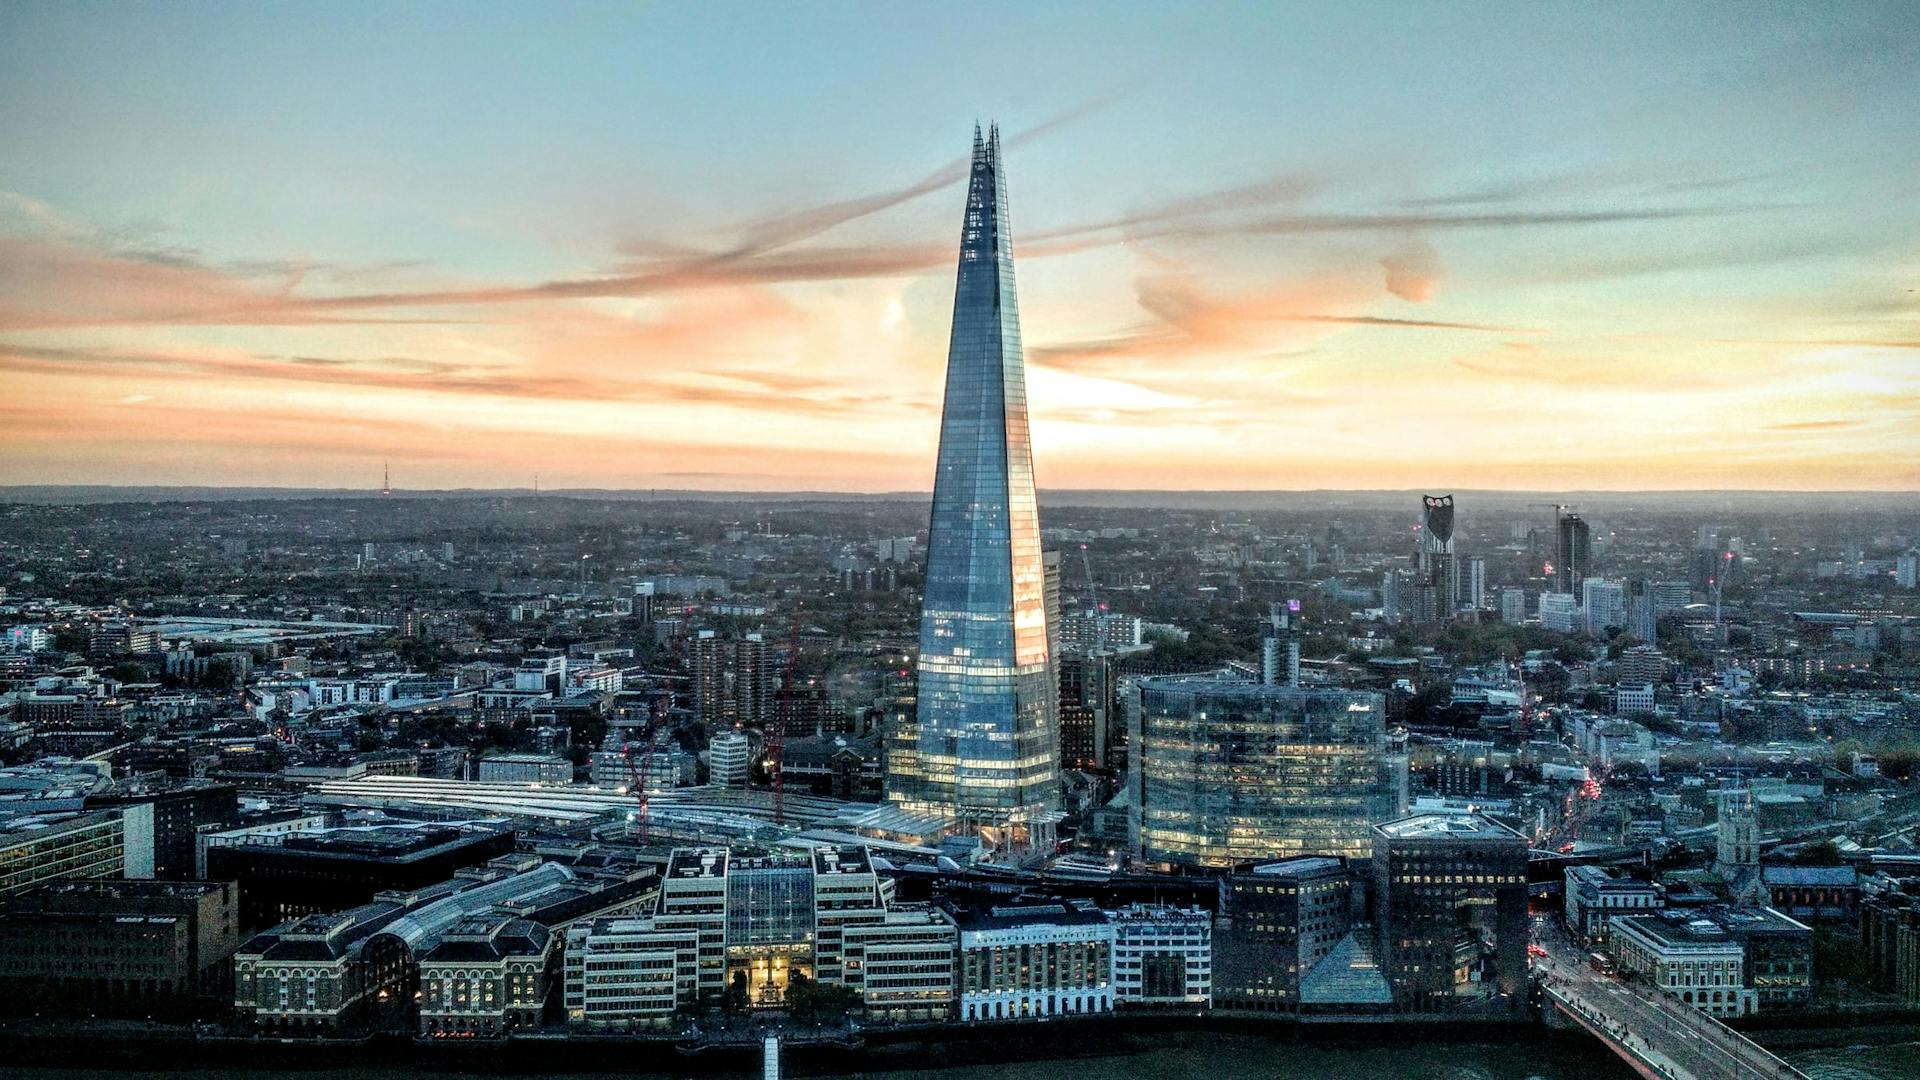 The Shard in London rising above the skyline